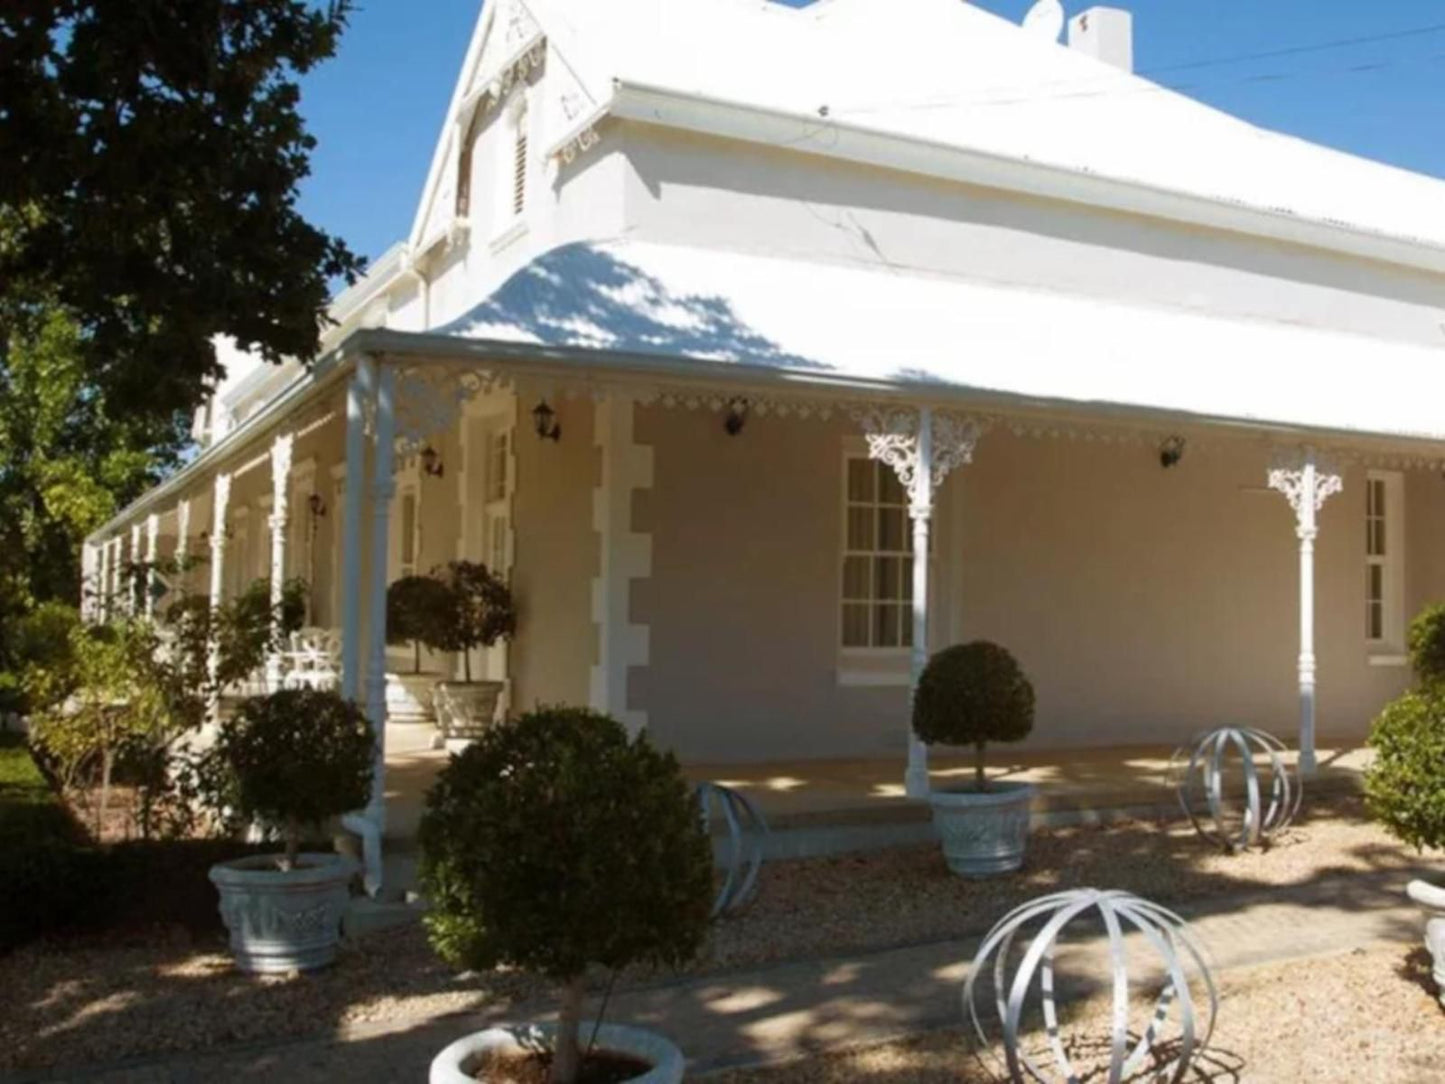 Kloovenburg Pastorie Riebeek Kasteel Western Cape South Africa House, Building, Architecture